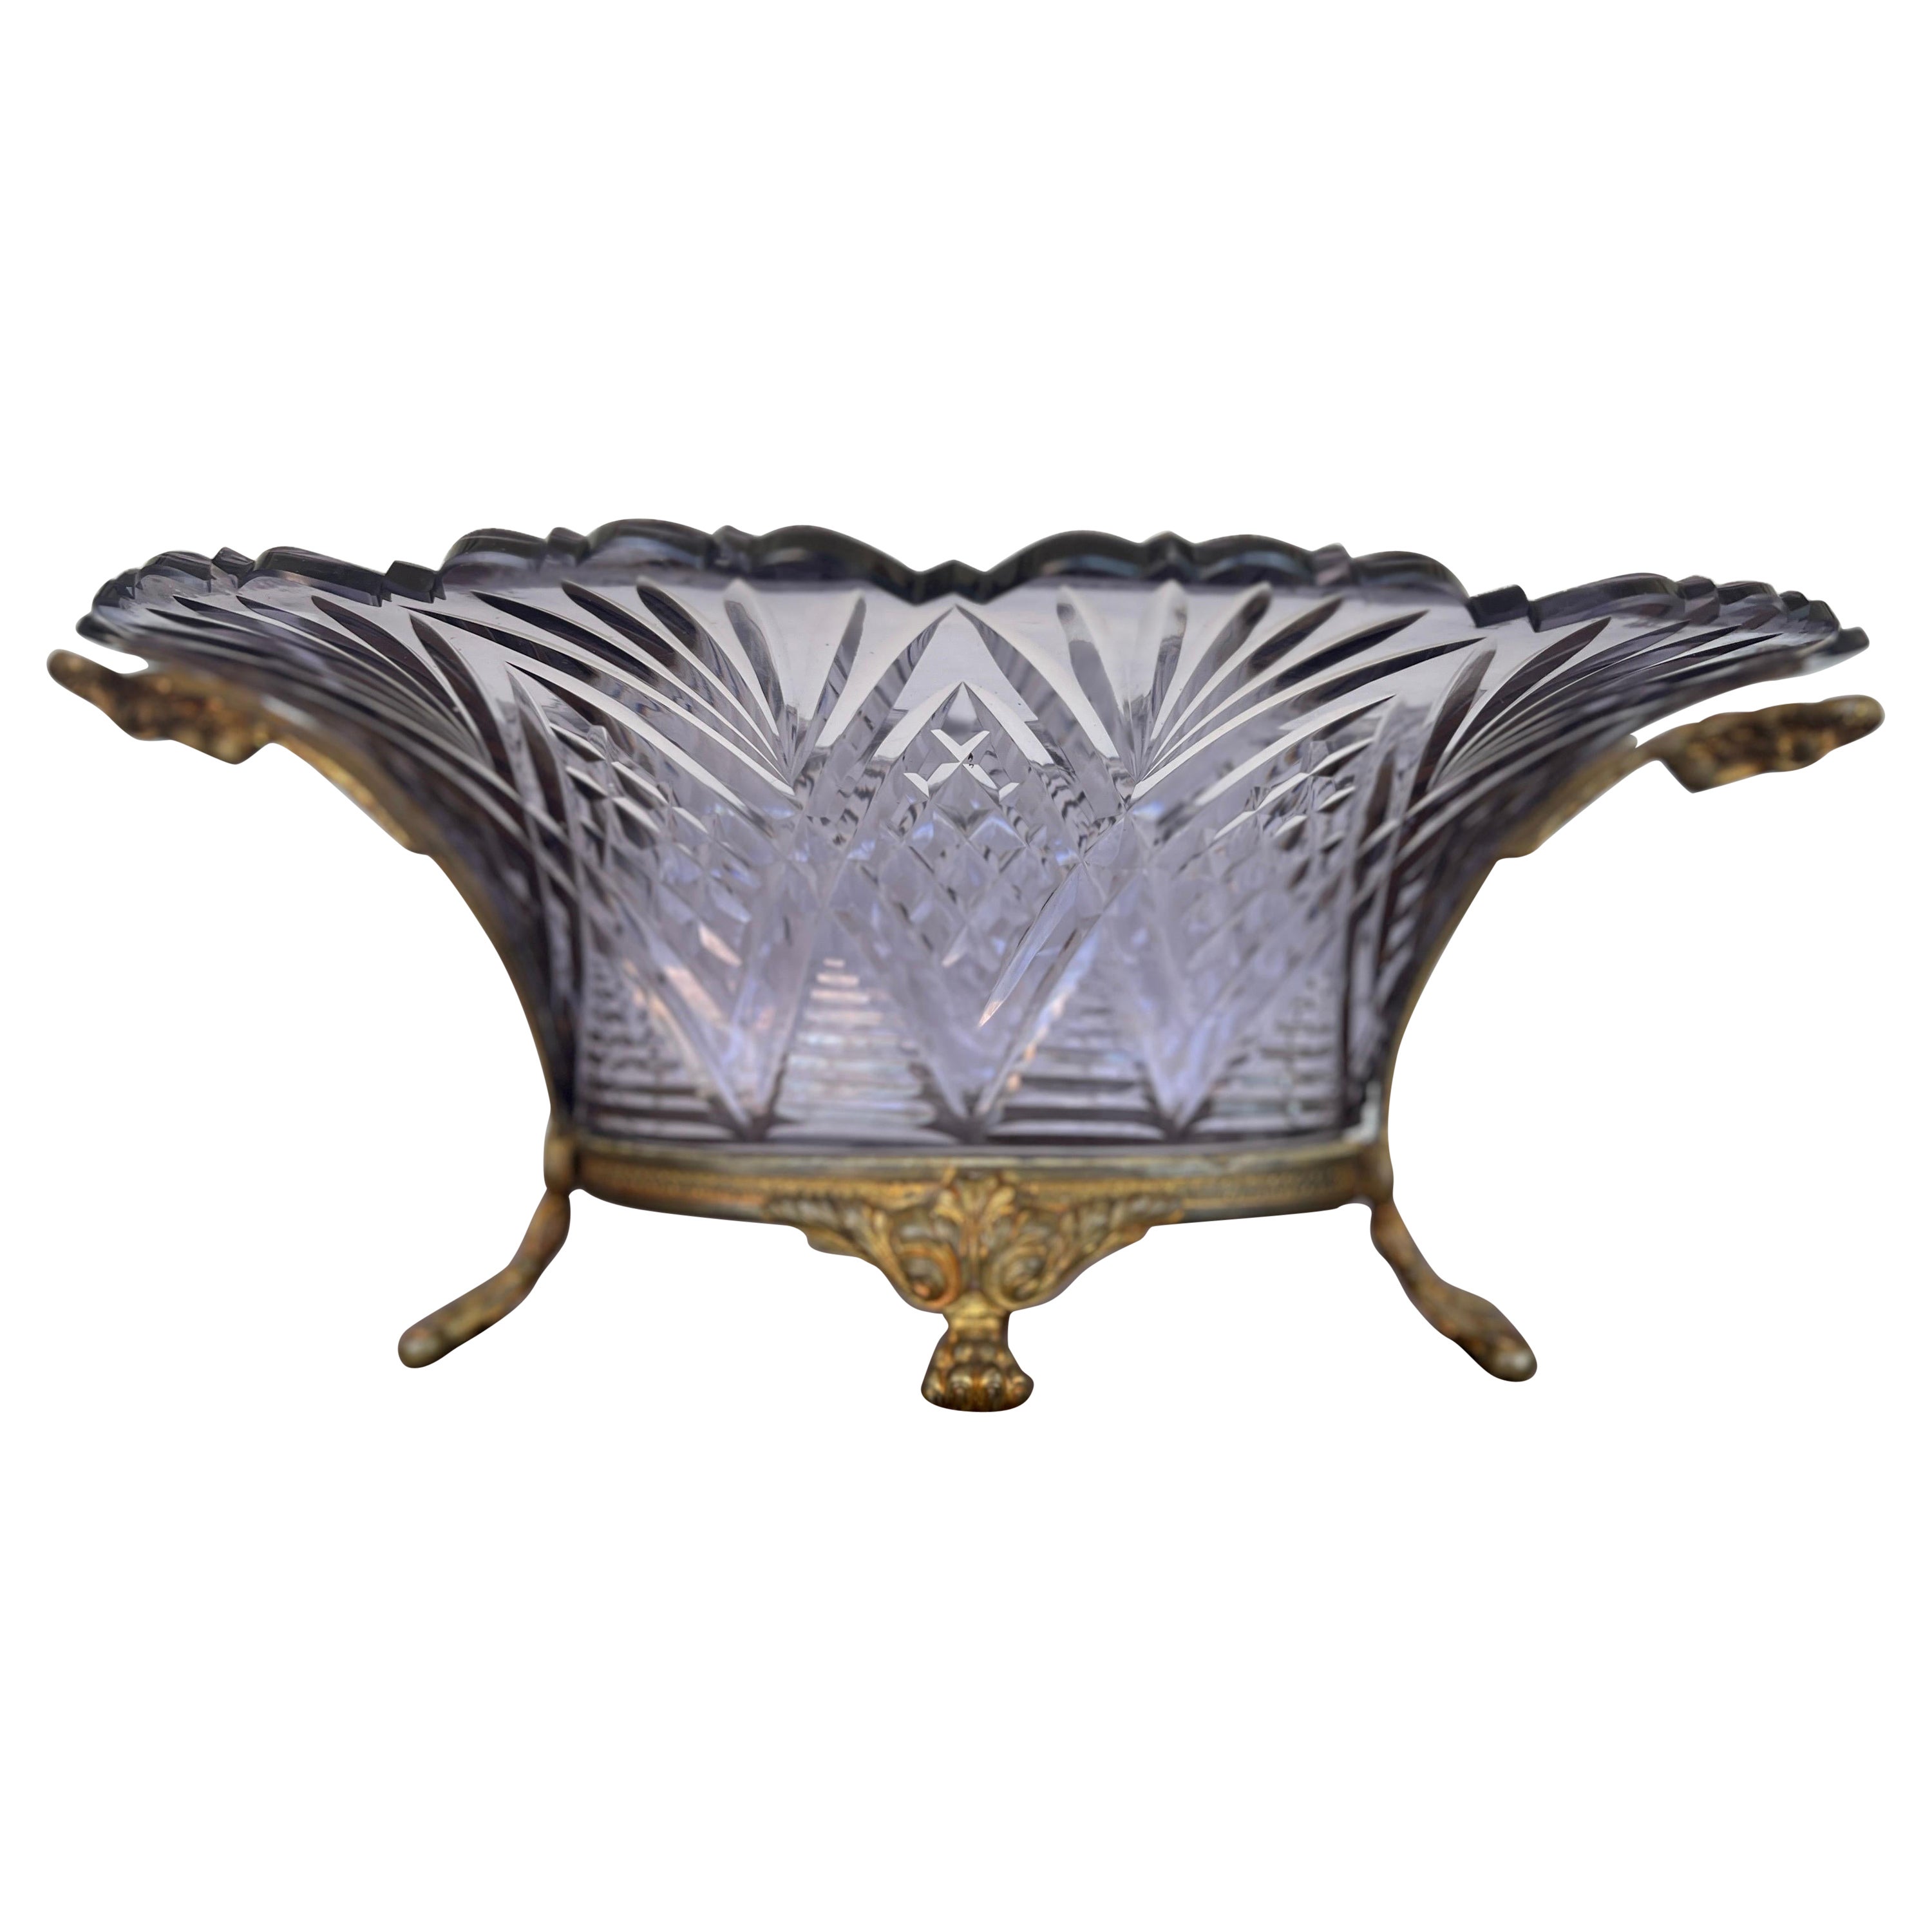 Antique French Baccarat Amethyst Glass and Ormolu Mounted Centerpiece Bowl For Sale